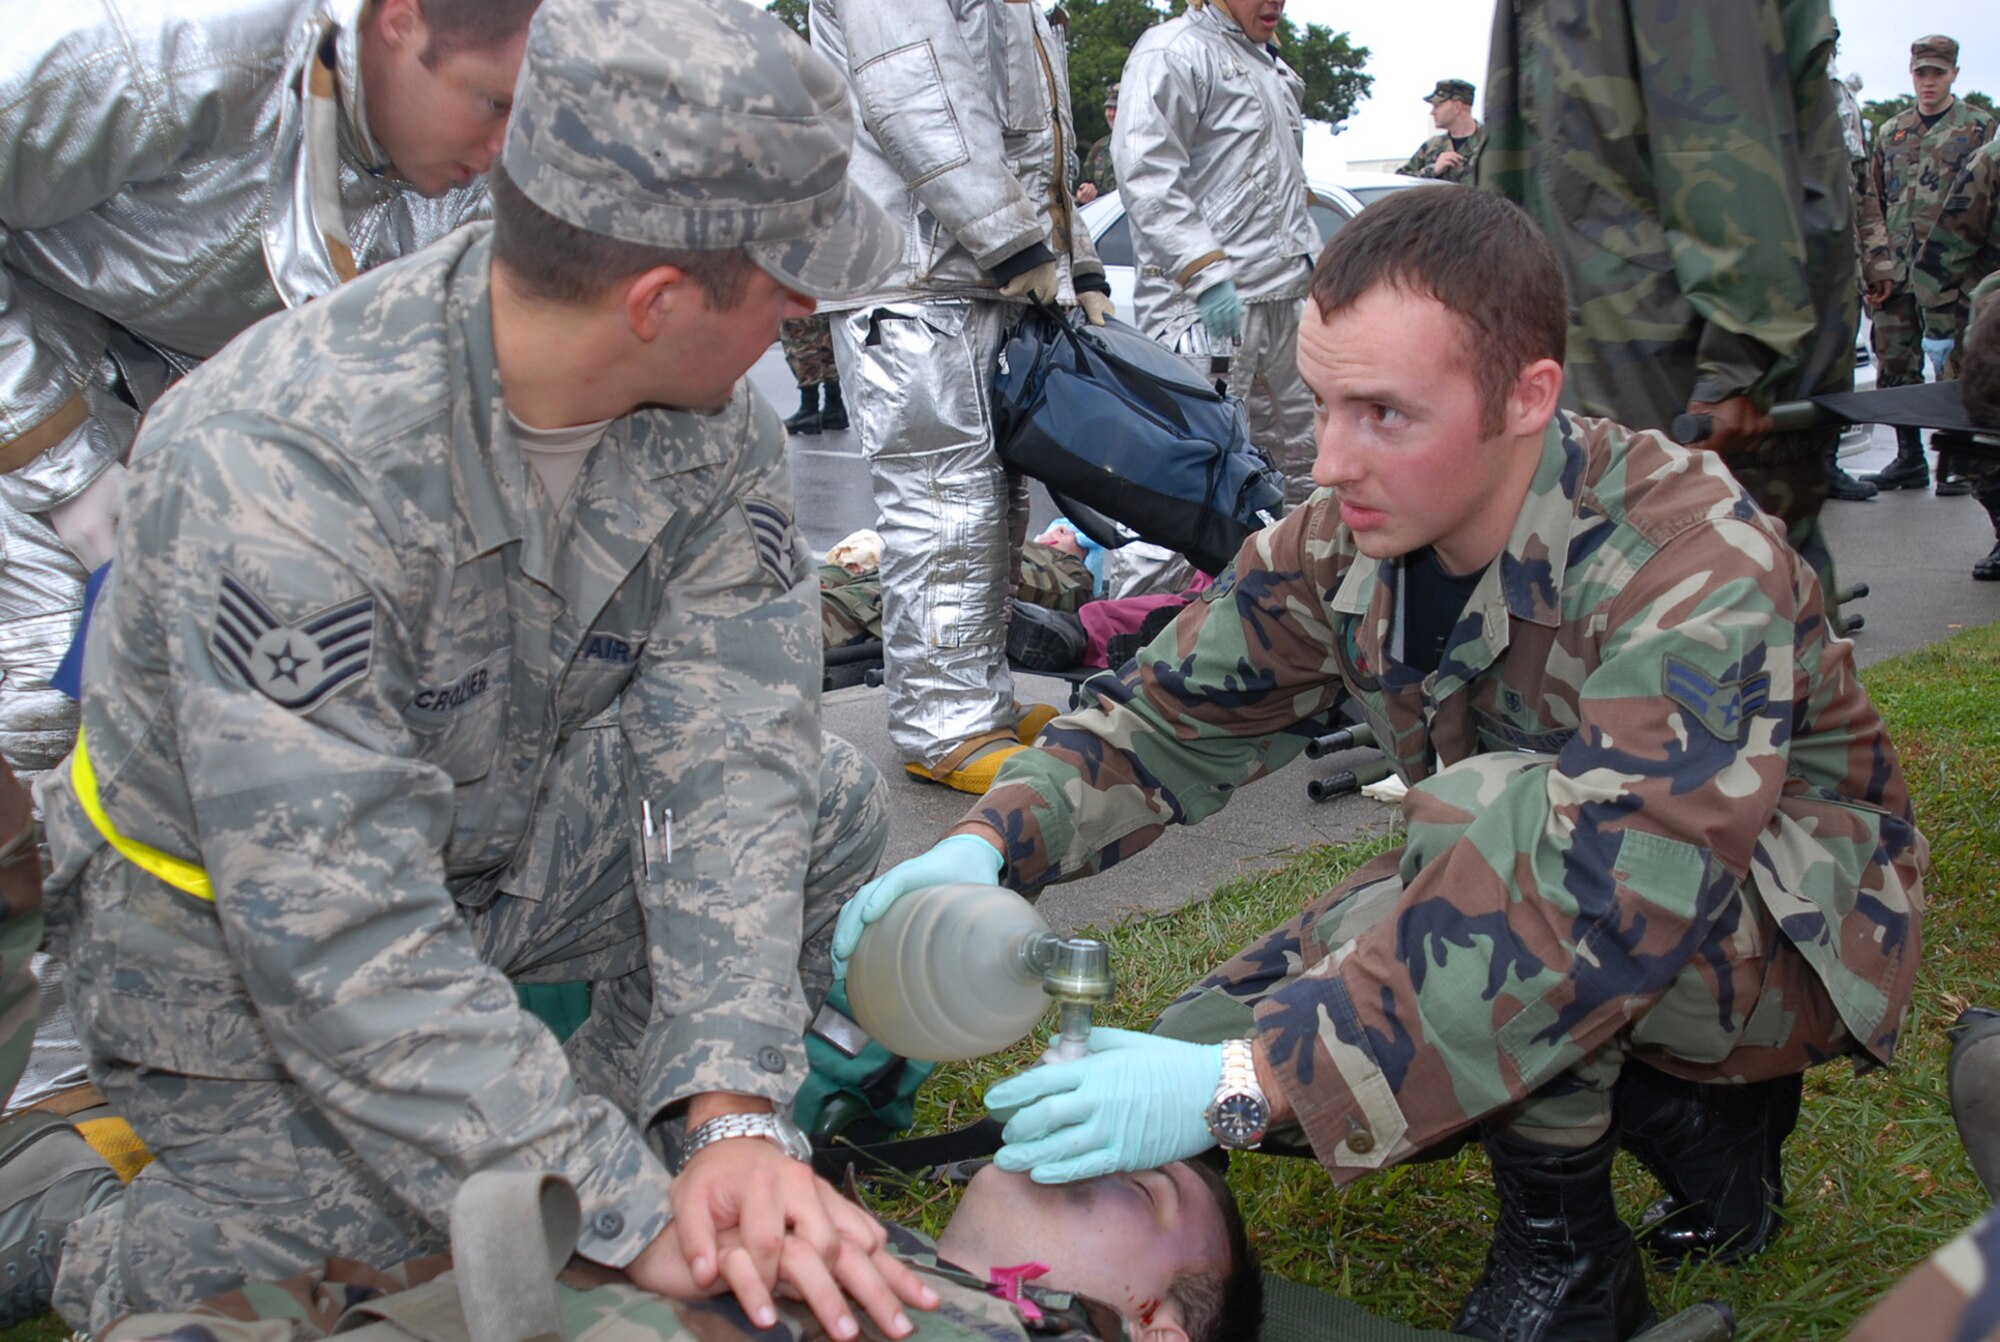 Staff Sgt. Michael Crozier, 18th Communications Squadron, and Airman First Class Michael Stull, 18th Aerospace Medical Squadron, perform CPR on a victim following a simulated explosion of the Marshall Dining Facility during Local Operational Readiness Exercise Beverly High at Kadena Air Base, Japan, Jan. 7, 2007. The 18th Wing exercise from Jan. 7 to 11 tests the wing's ability to respond in contingency situations.   (U.S. Air Force photo/Tech. Sgt. Dave DeRemer)